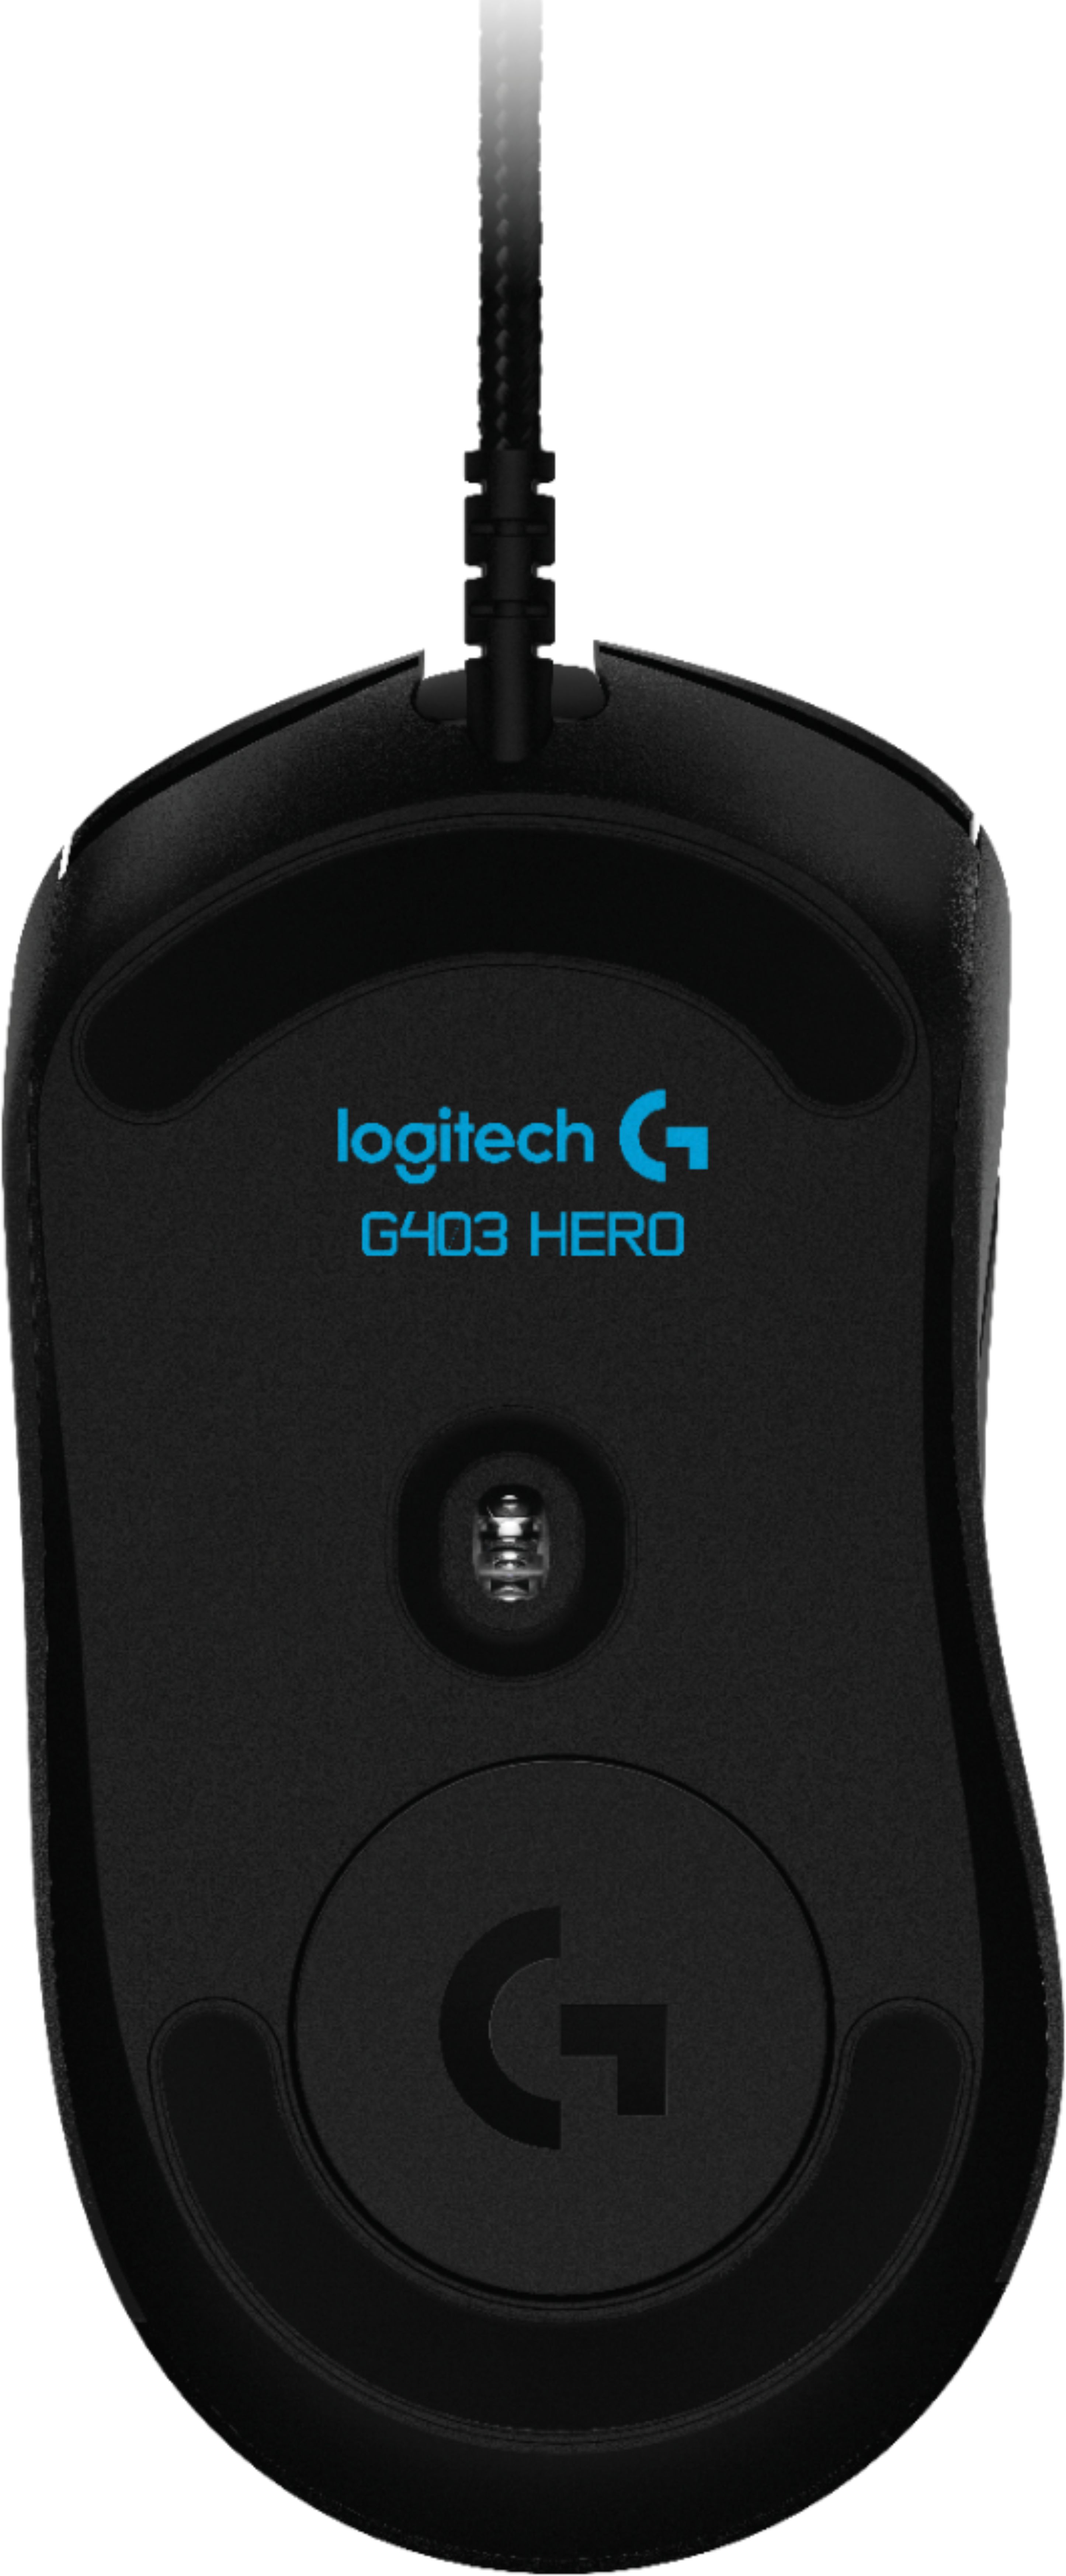 Logitech G403 Hero Wired Optical Gaming Mouse Black 910 Best Buy